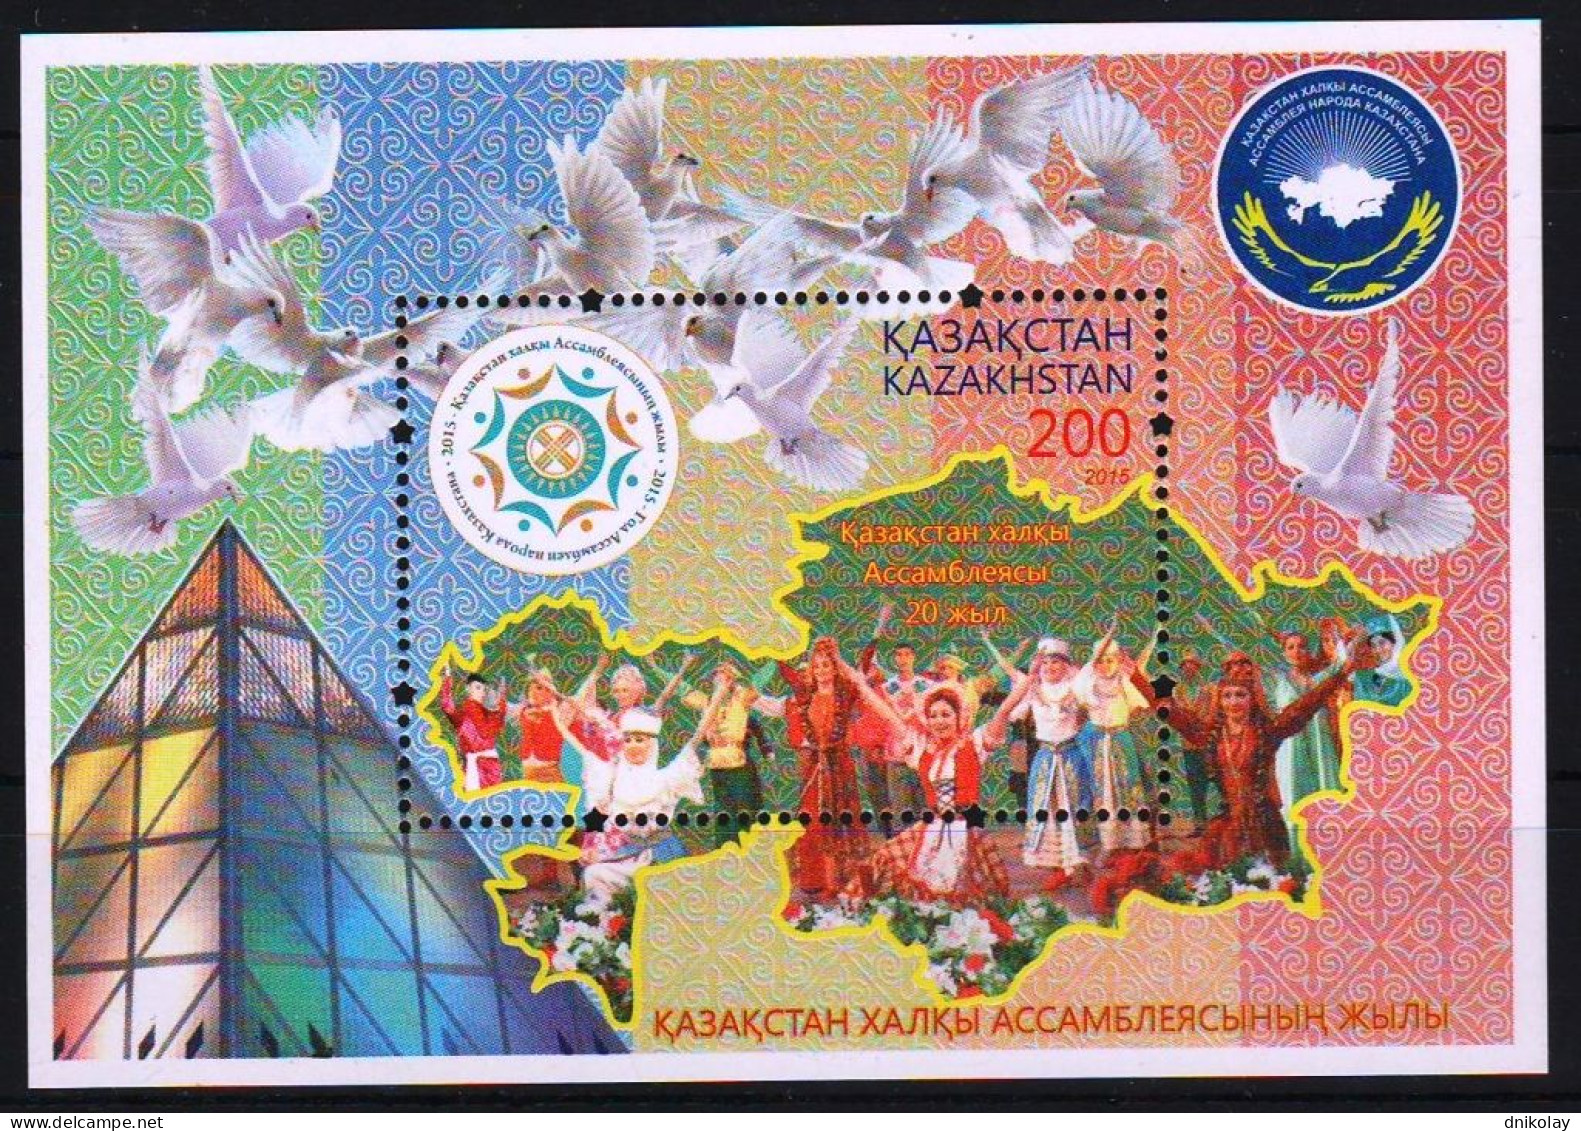 2015 902 Kazakhstan The 20th Anniversary Of The Assembly Of The People Of Kazakhstan MNH - Kasachstan